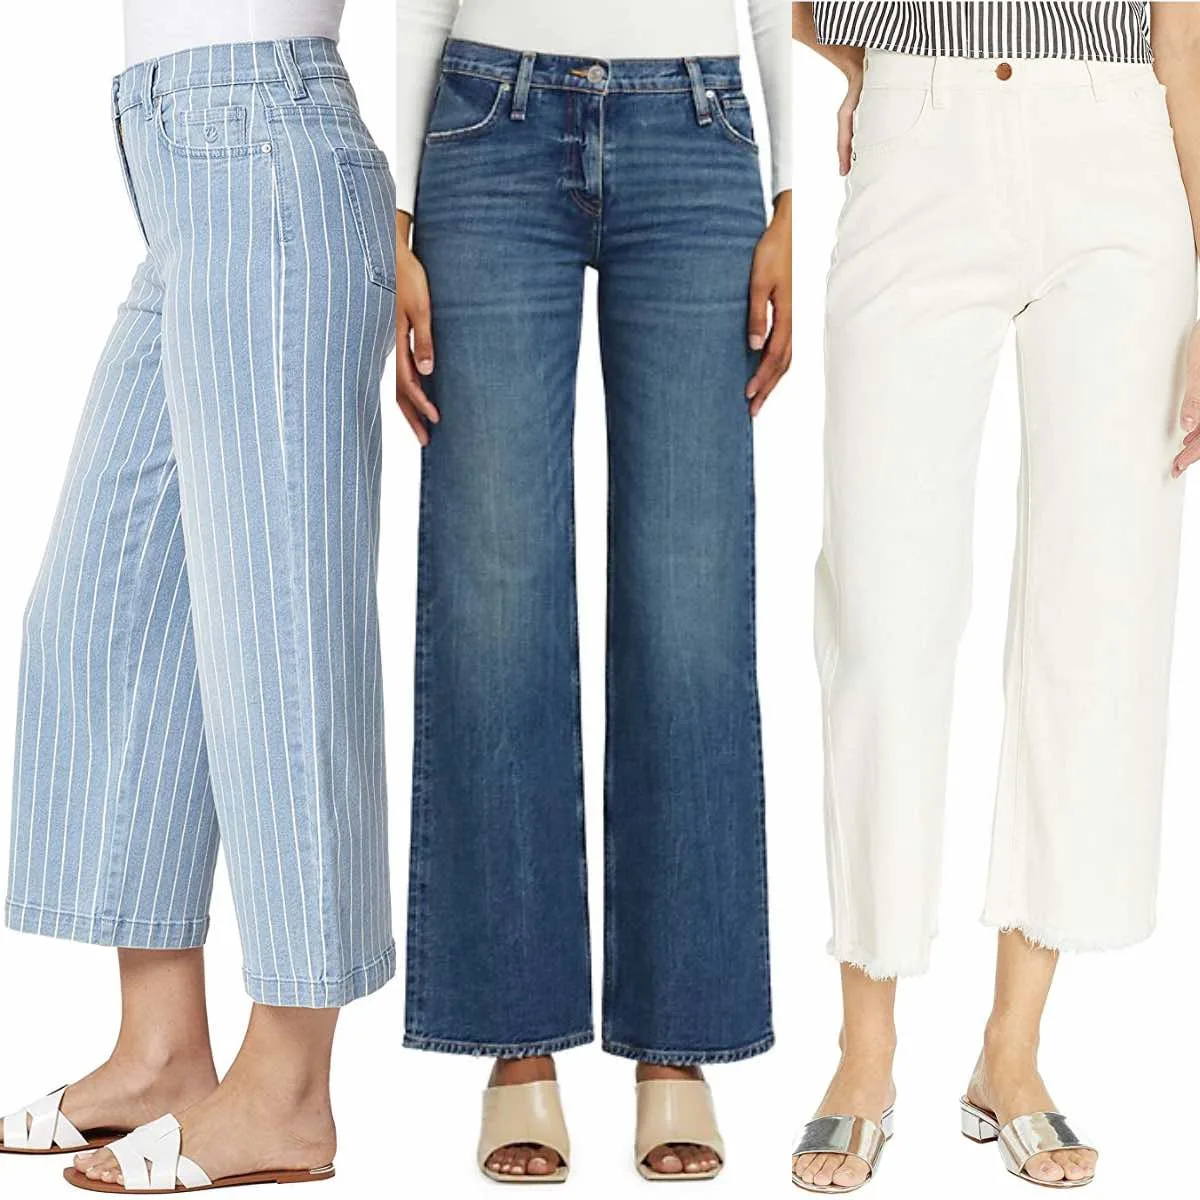 3 women wearing different slides with wide leg jeans.